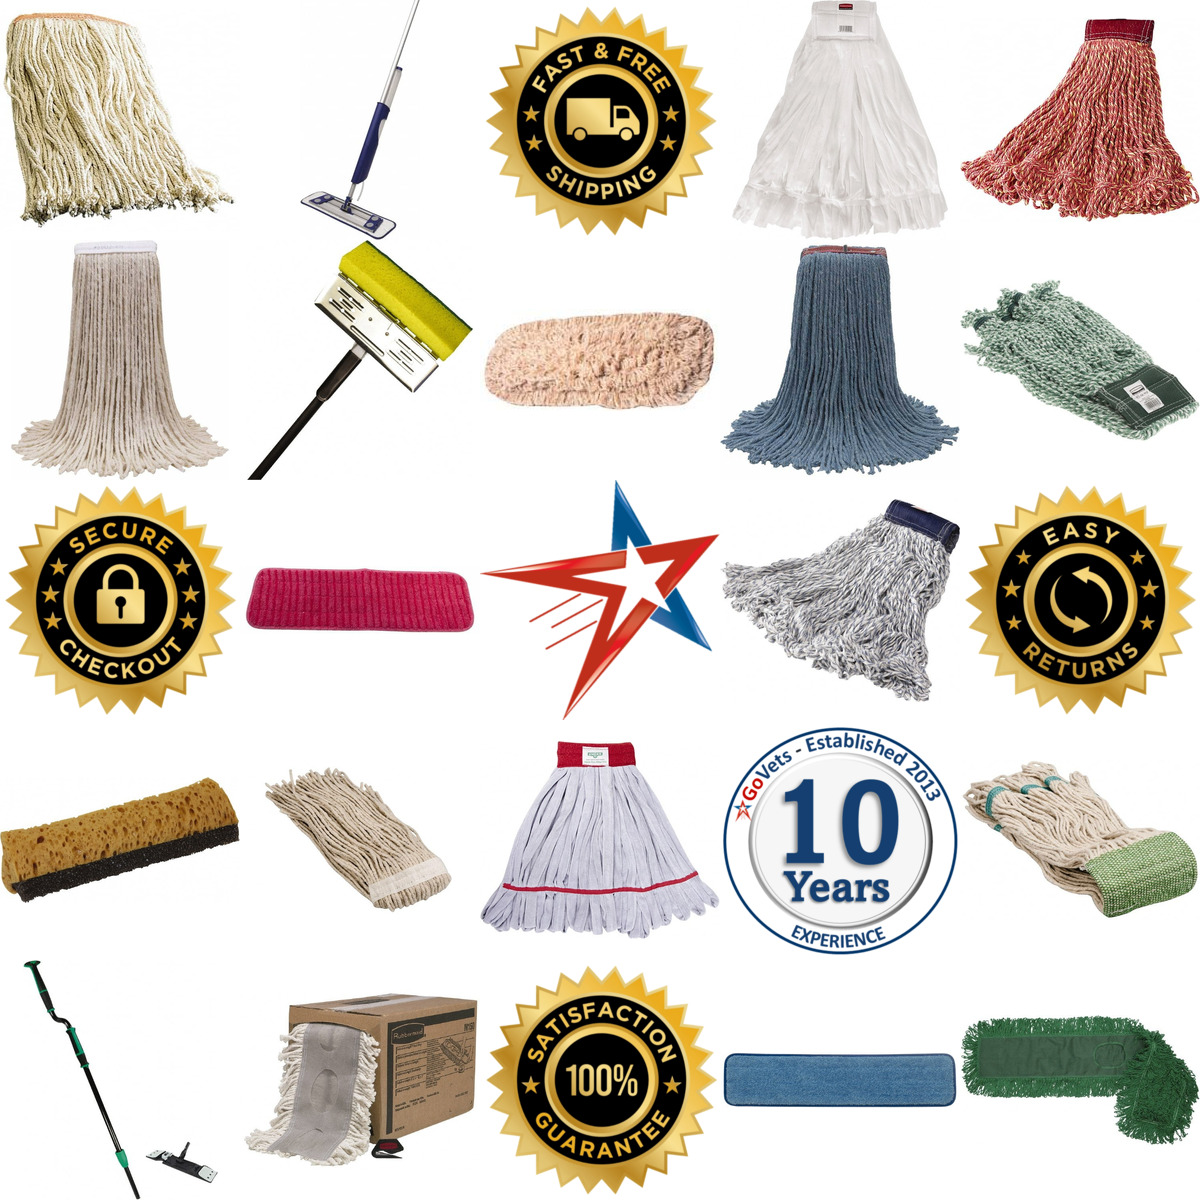 A selection of Mops products on GoVets